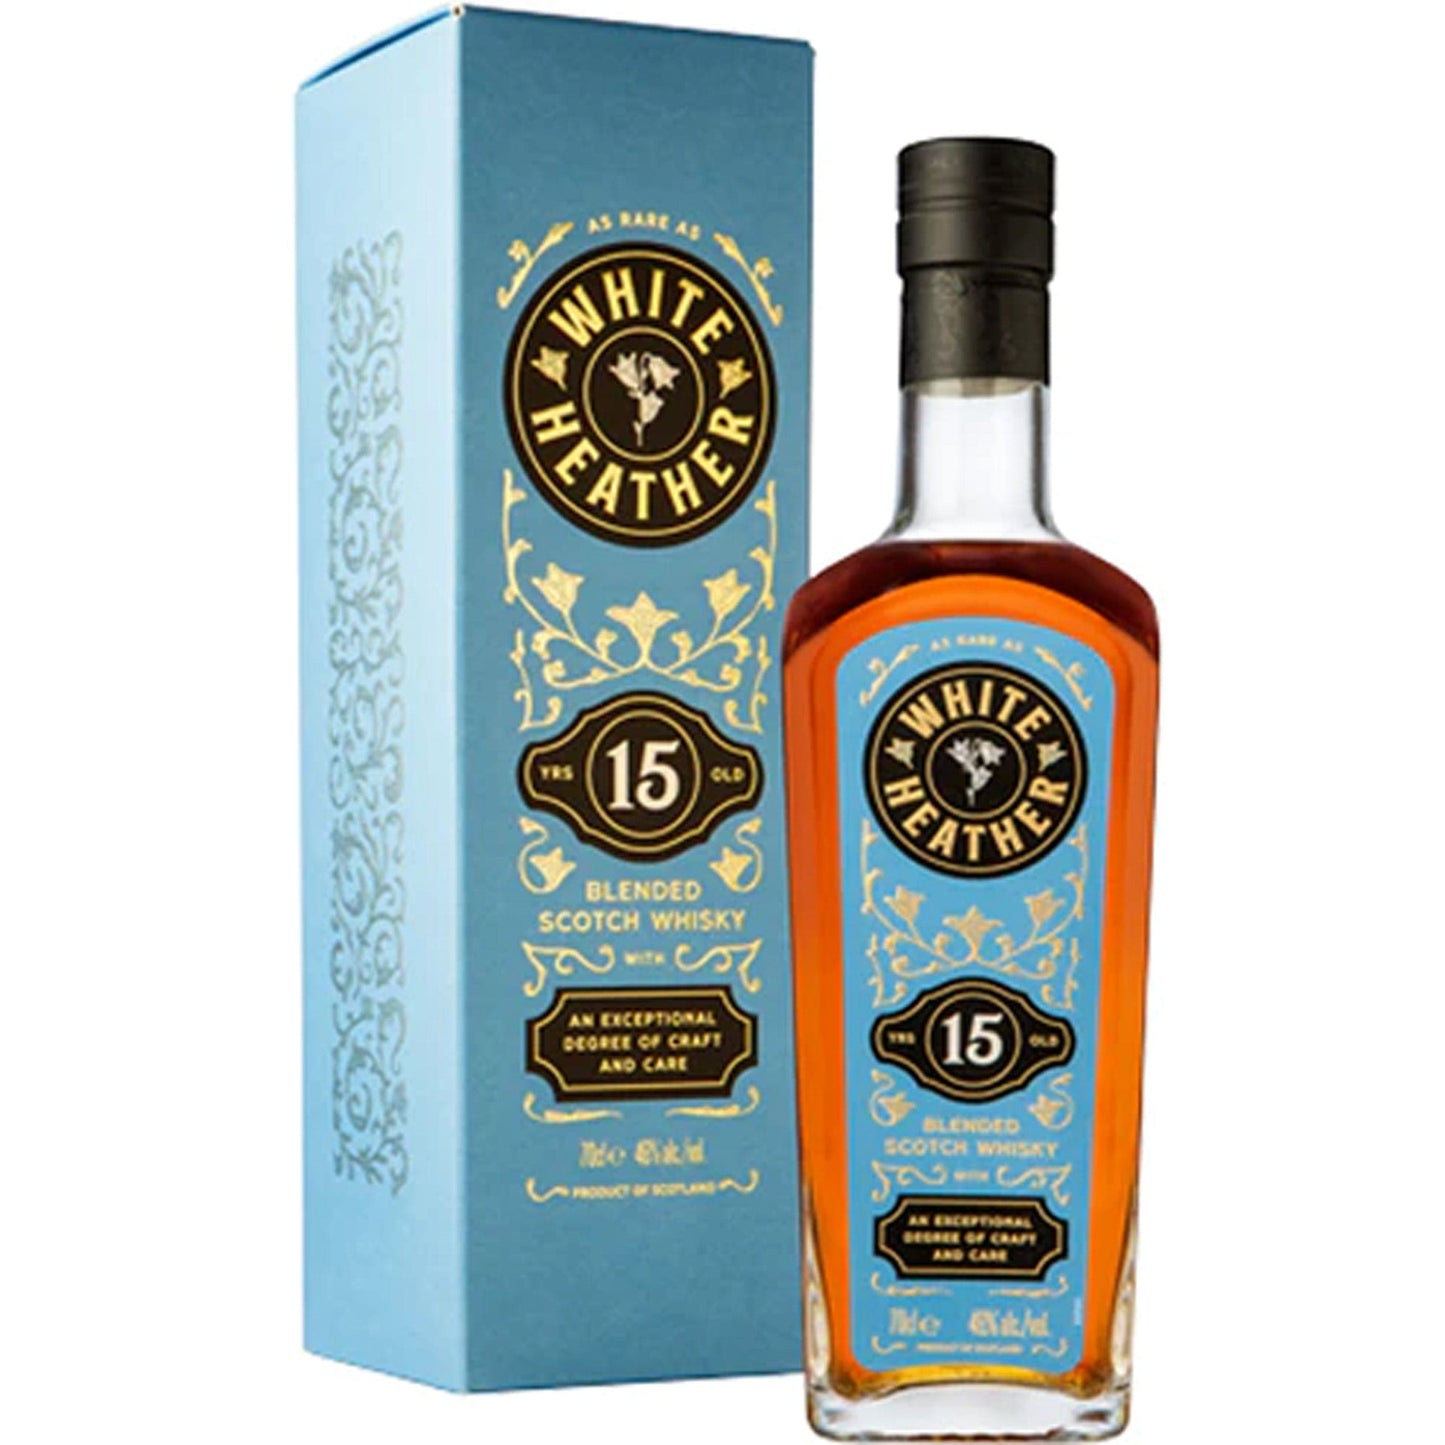 White Heather 15 Year Blended Scotch Whisky P.C. 